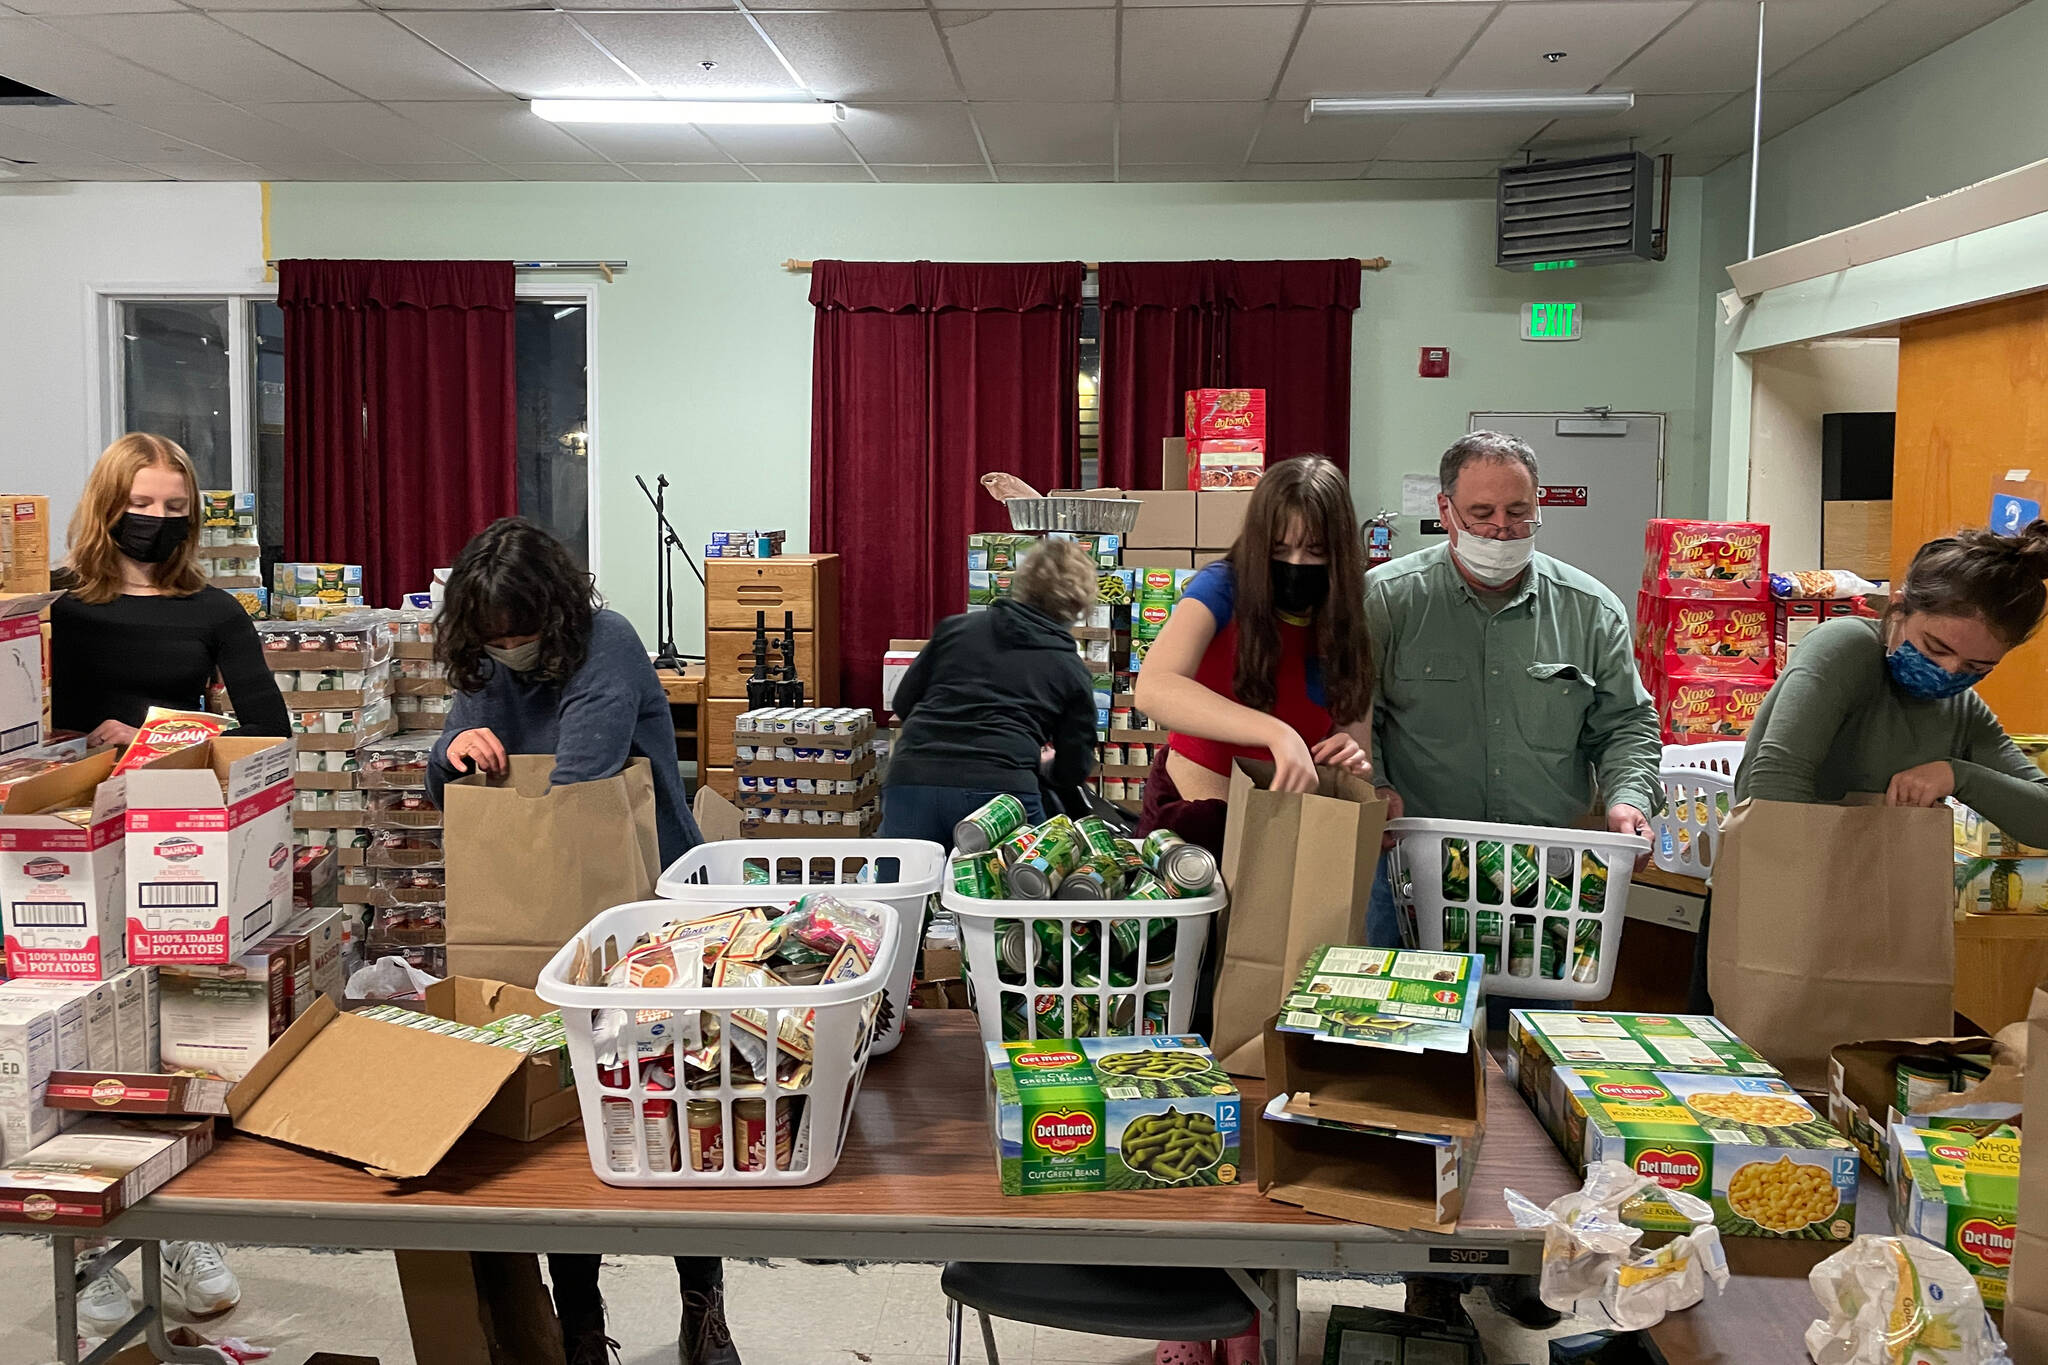 Michael S. Lockett / Juneau Empire
Volunteers from the Thunder Mountain High School Interact Club prepare Thanksgiving food baskets for the Juneau Society of St. Vincent de Paul on Nov. 18.